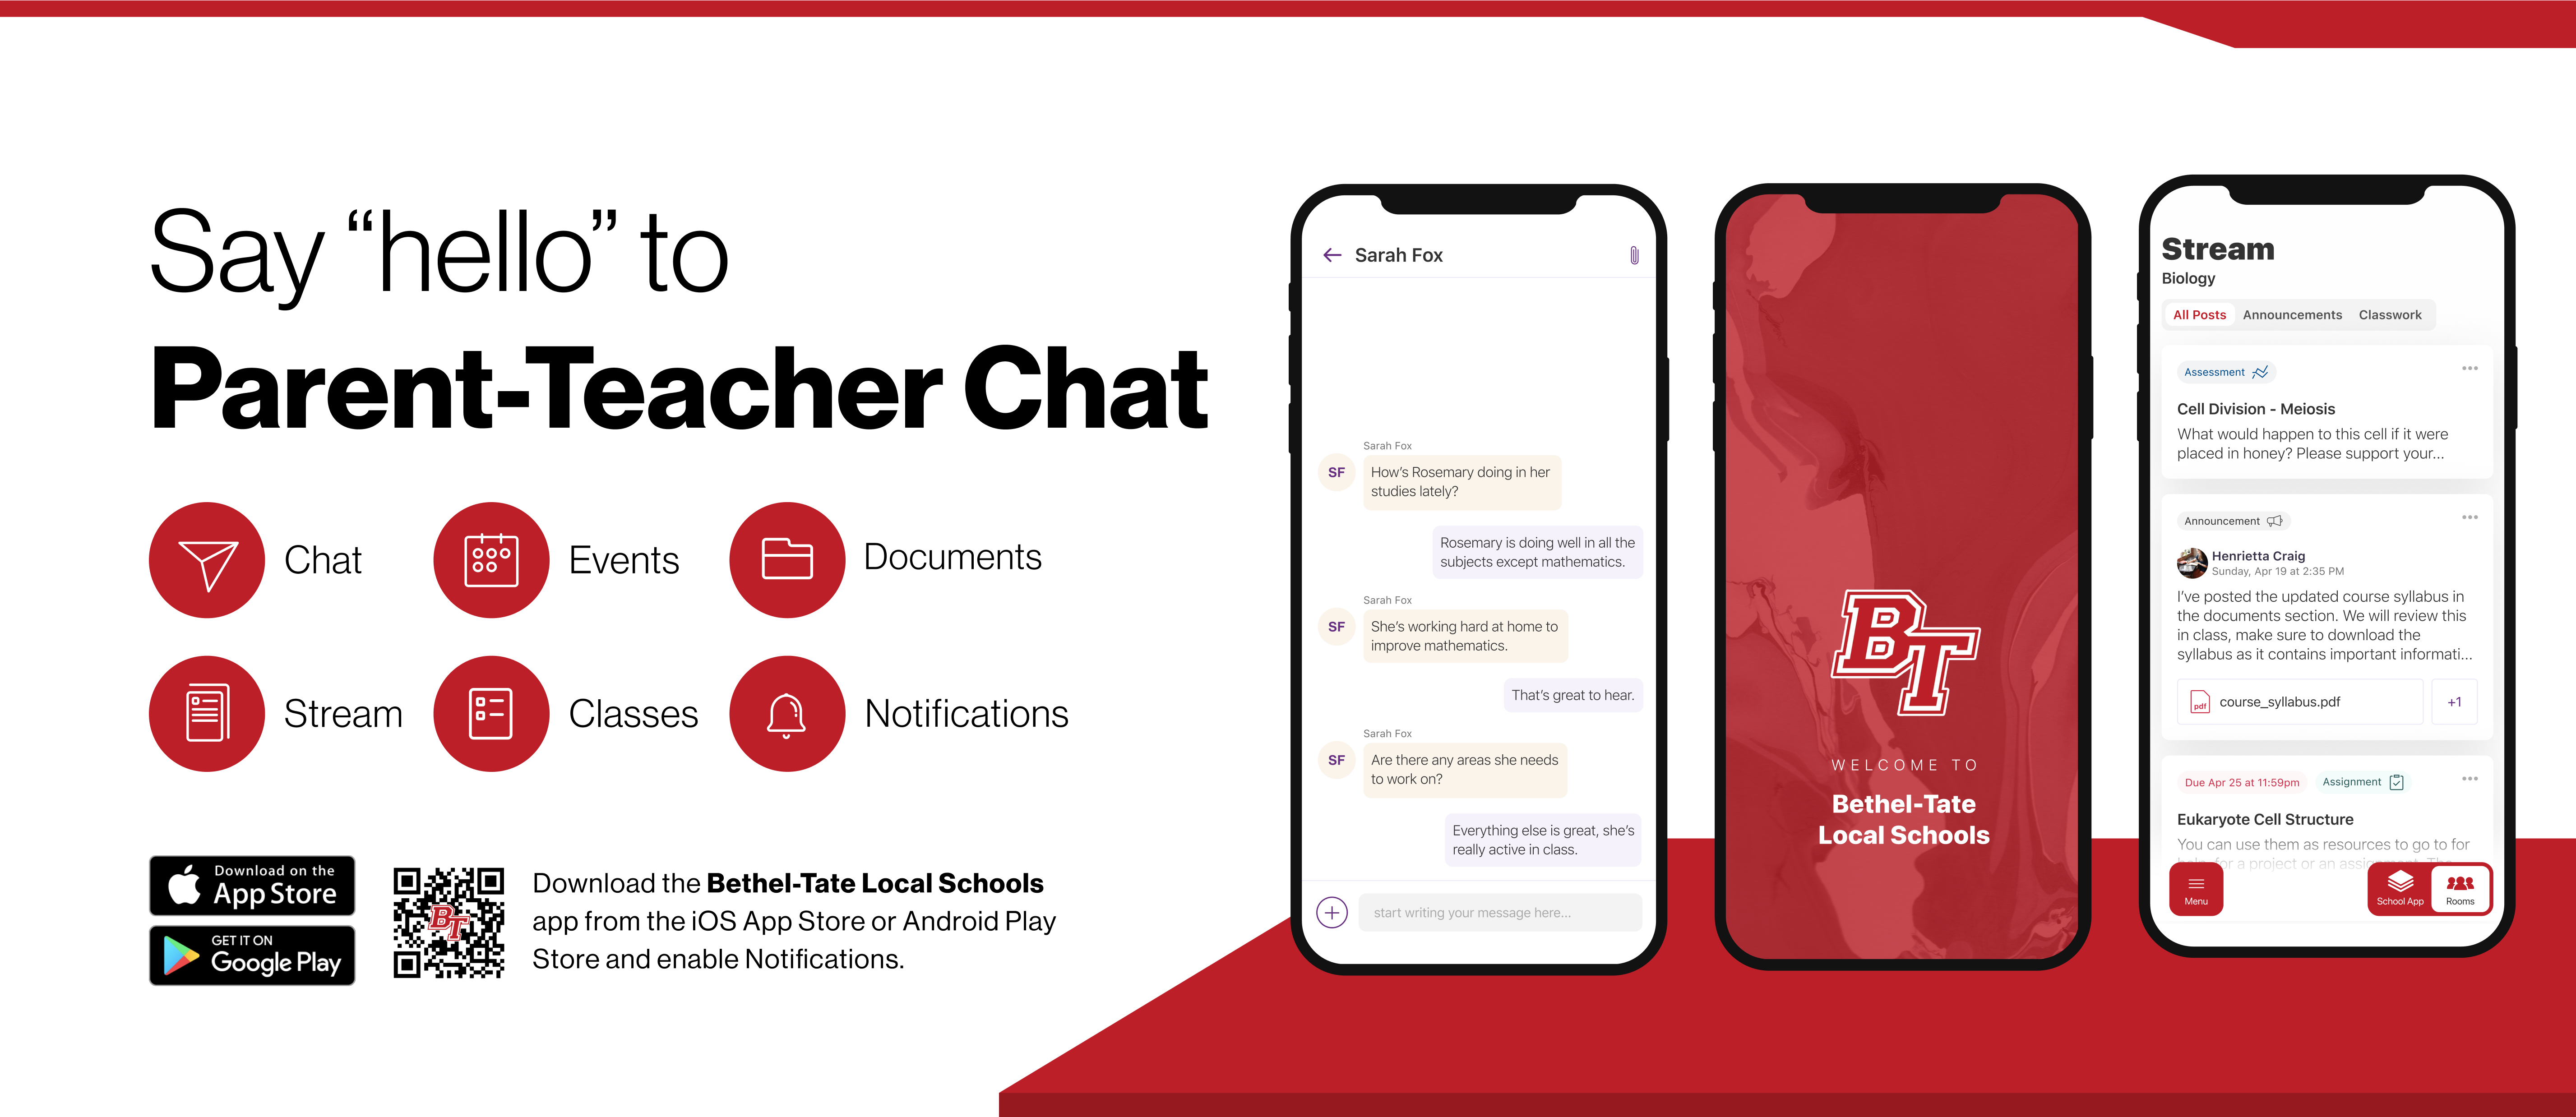 Say hello to Parent-Teacher chat in the new Rooms app. Download the Bethel-Tate Local Schools app in the Google Play or Apple App store.